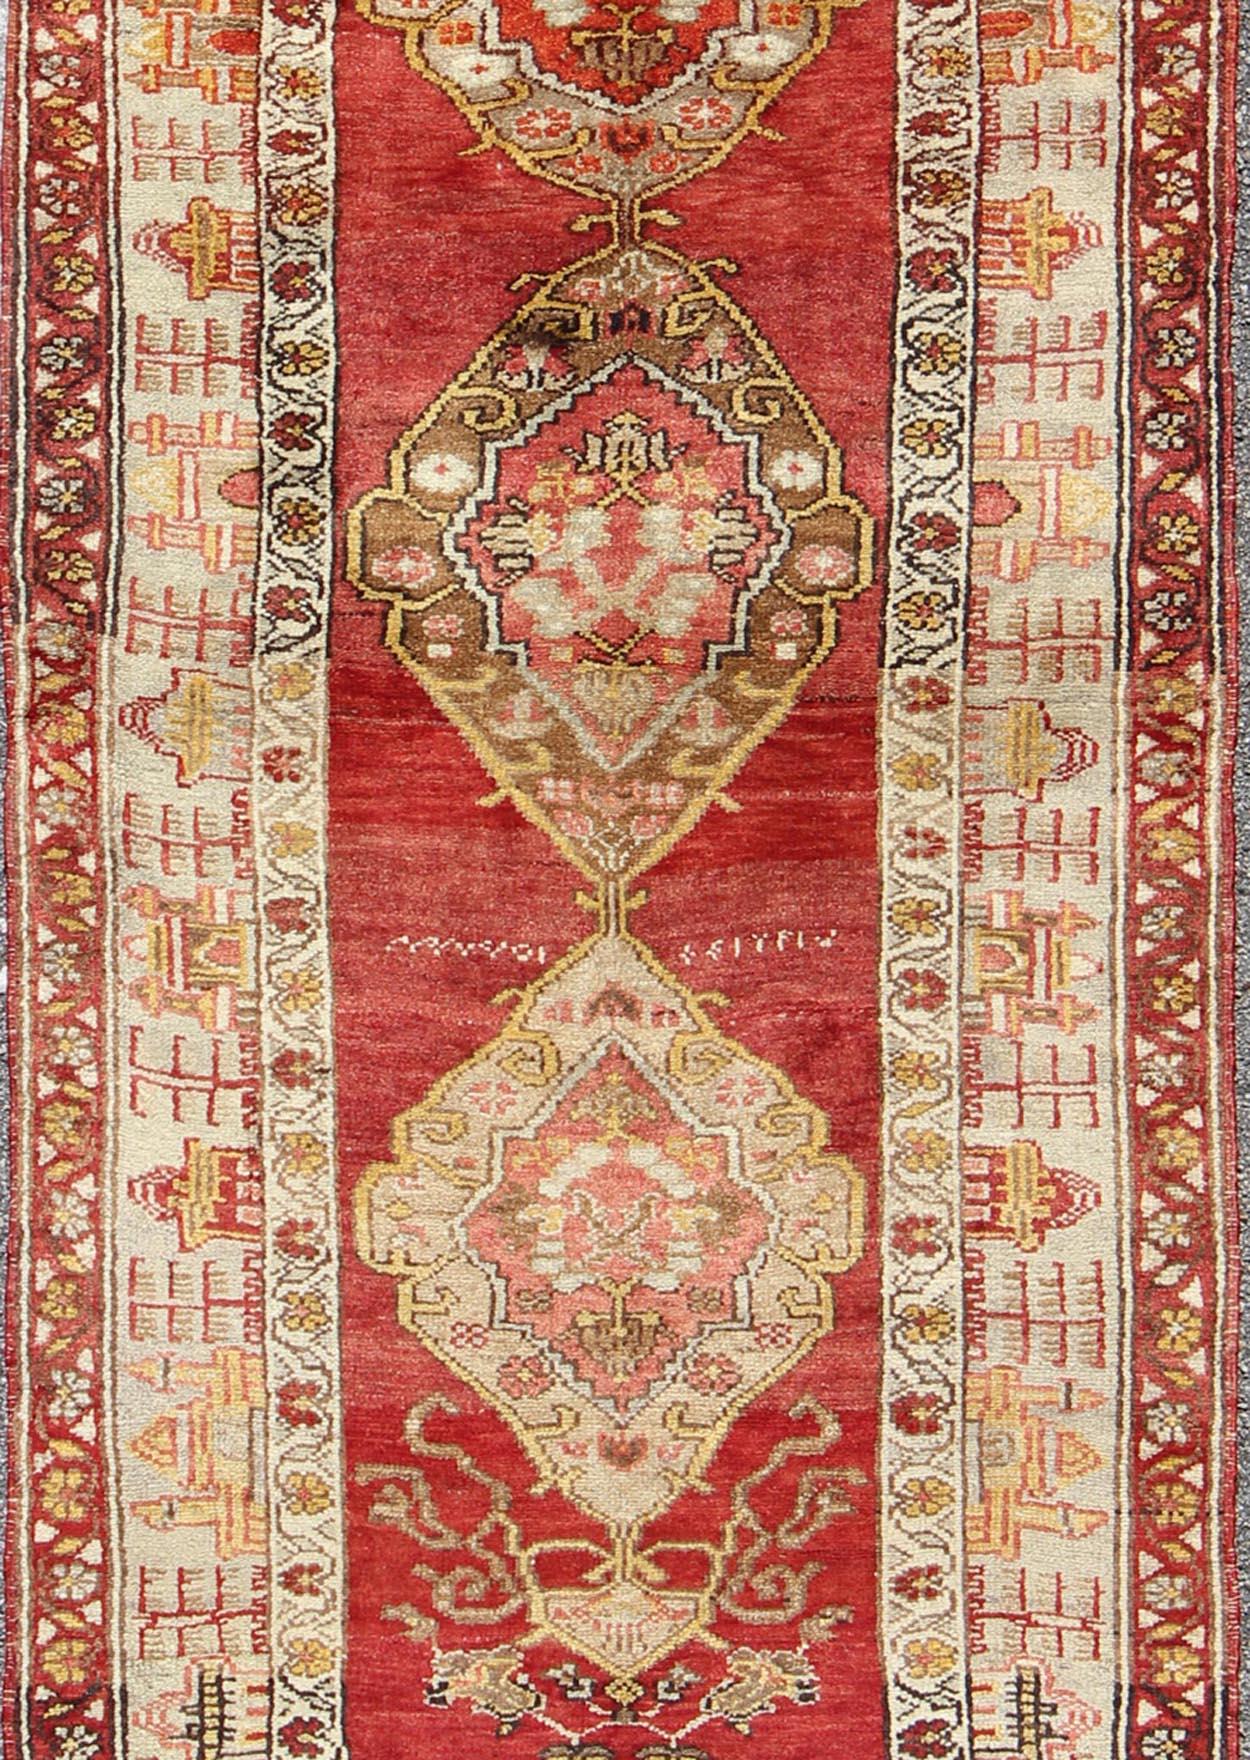 This colorful Oushak carpet rests beautifully upon a field of elegant red. A large medallion of brown, taupe, yellow and gray takes center stage and is well balanced by four prominent organic corner motifs composed of various muted taupe and light